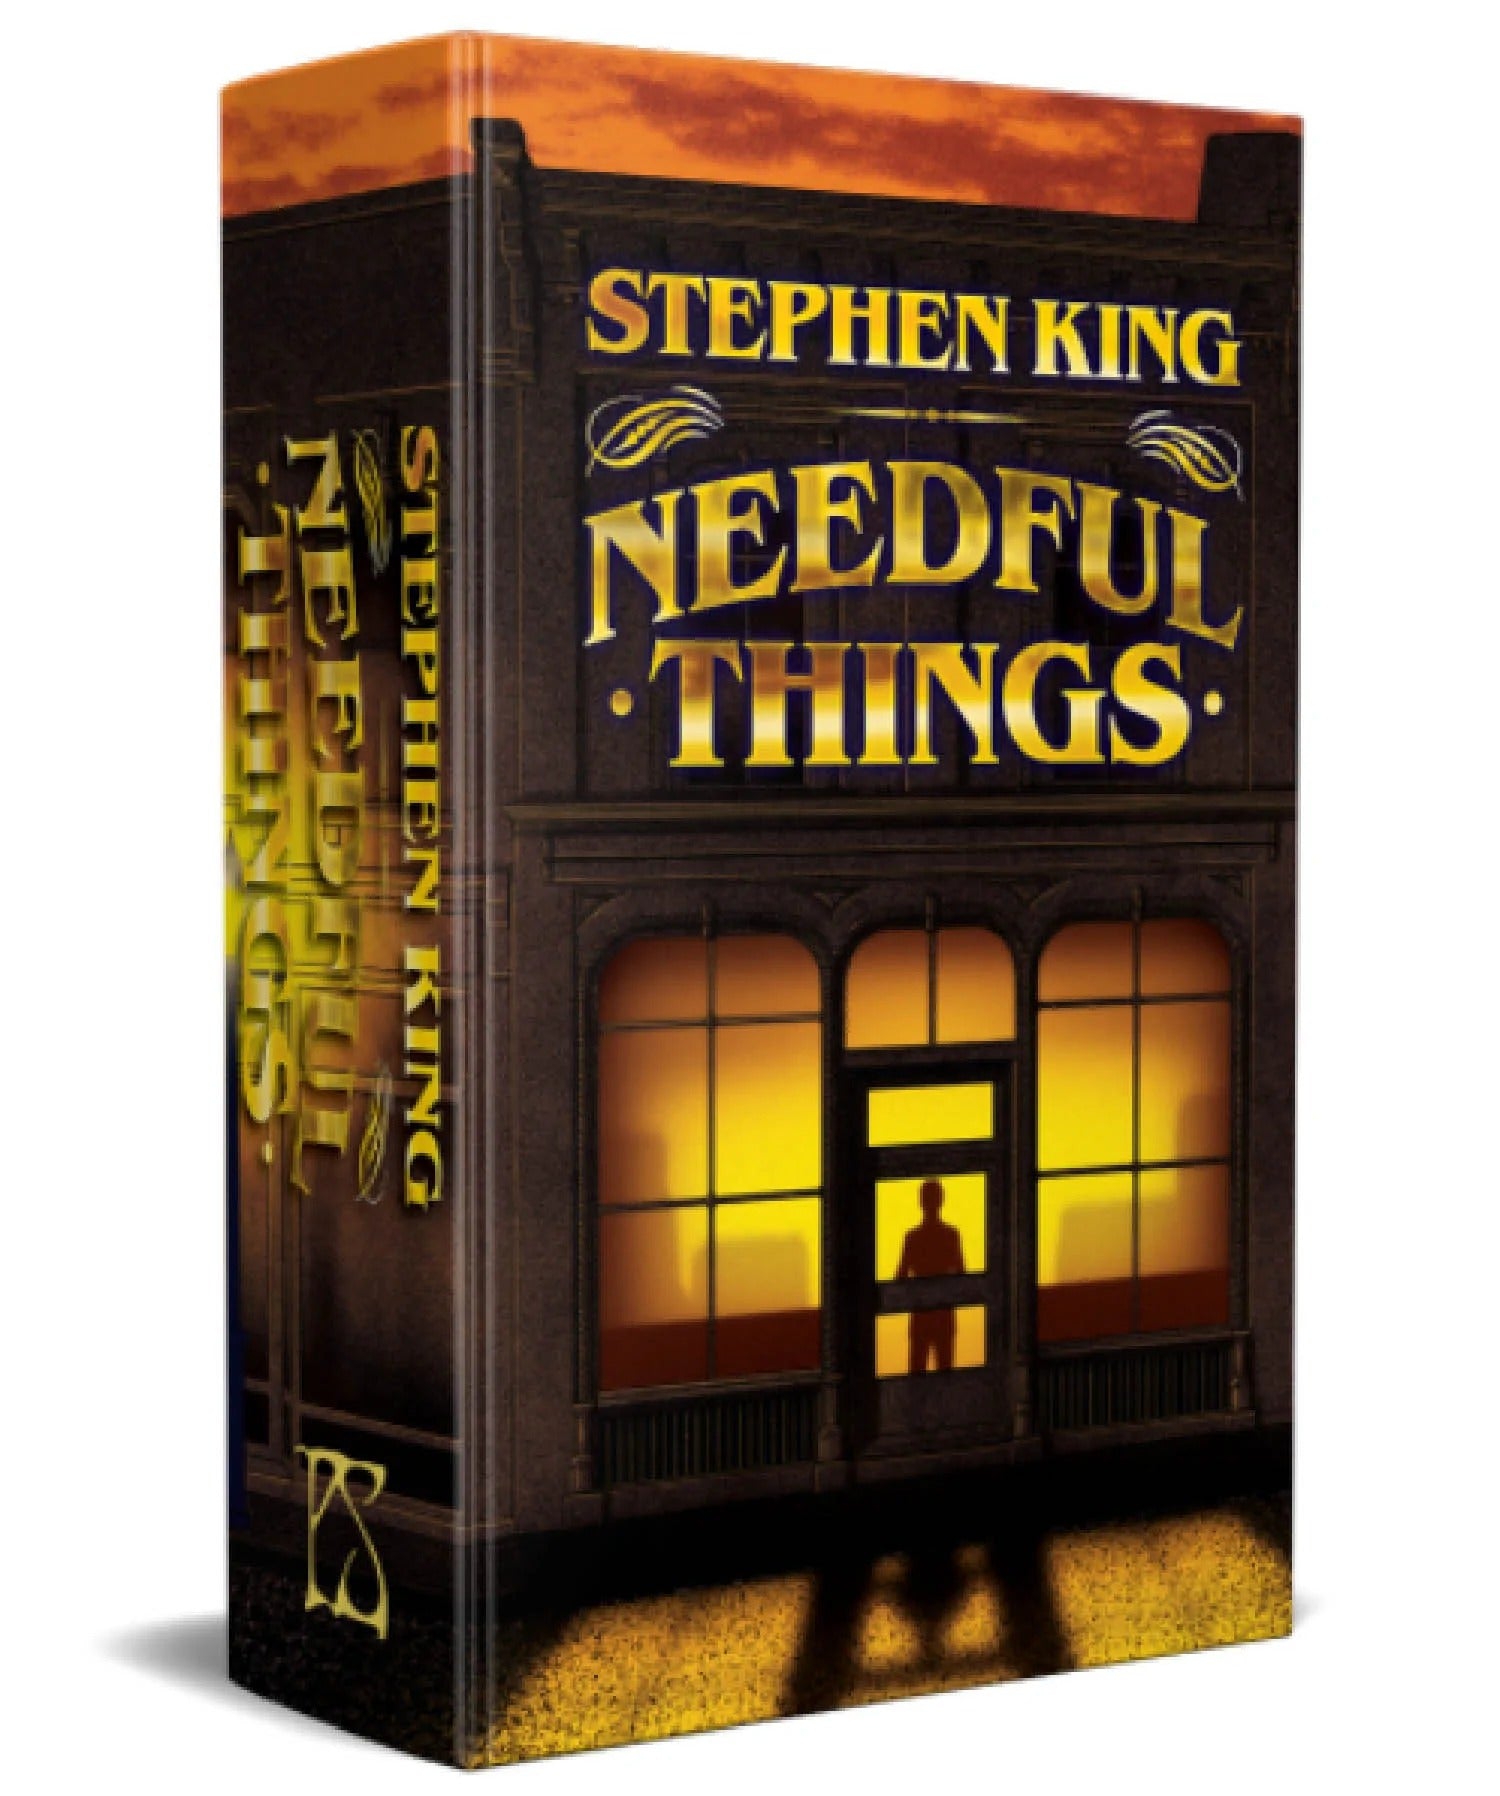 Stephen King Contest November 7th to 14th 2022!